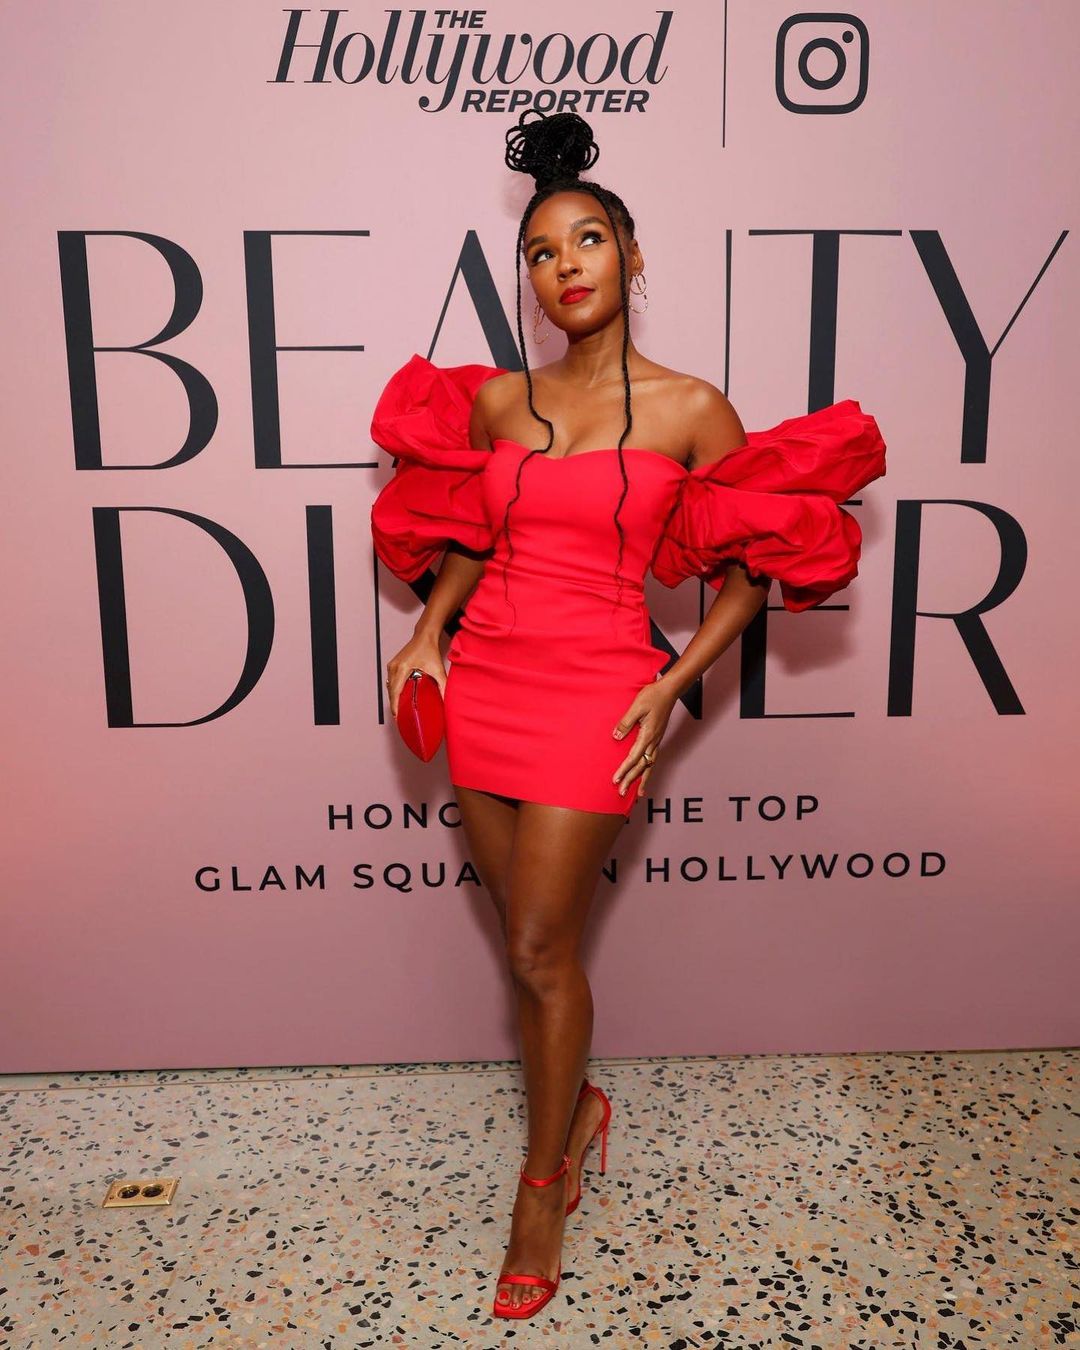 the-best-dressed-stars-the-hollywood-reporter-beauty-dinner-took-camera-ready-serious-last-week